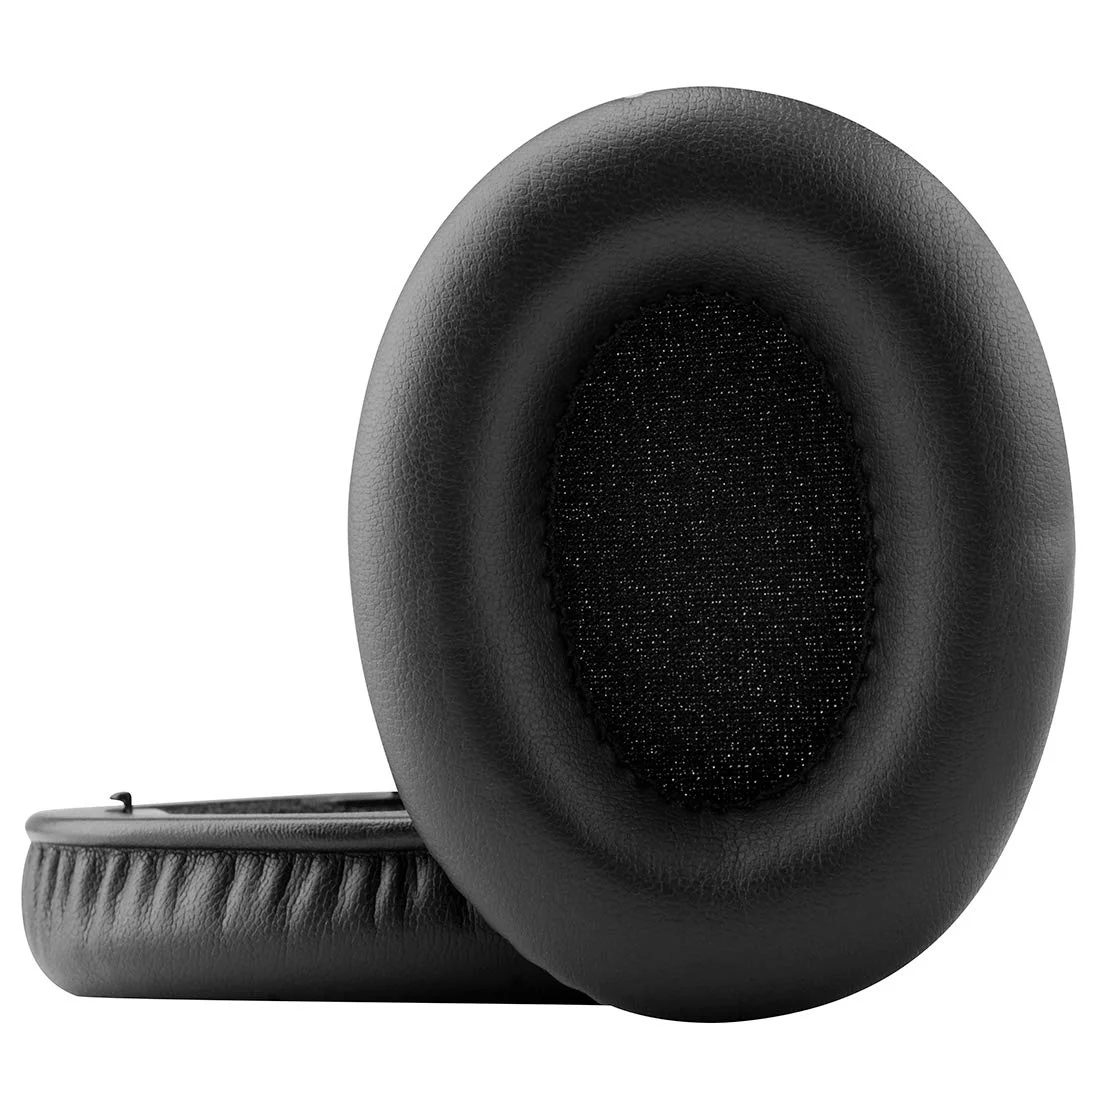 

Replacement Ear Pad Cushion Cups Cover Earpads Repair Parts Headband for Beats by Dr. Dre Studio 1.0 (1st Gen) Headphones